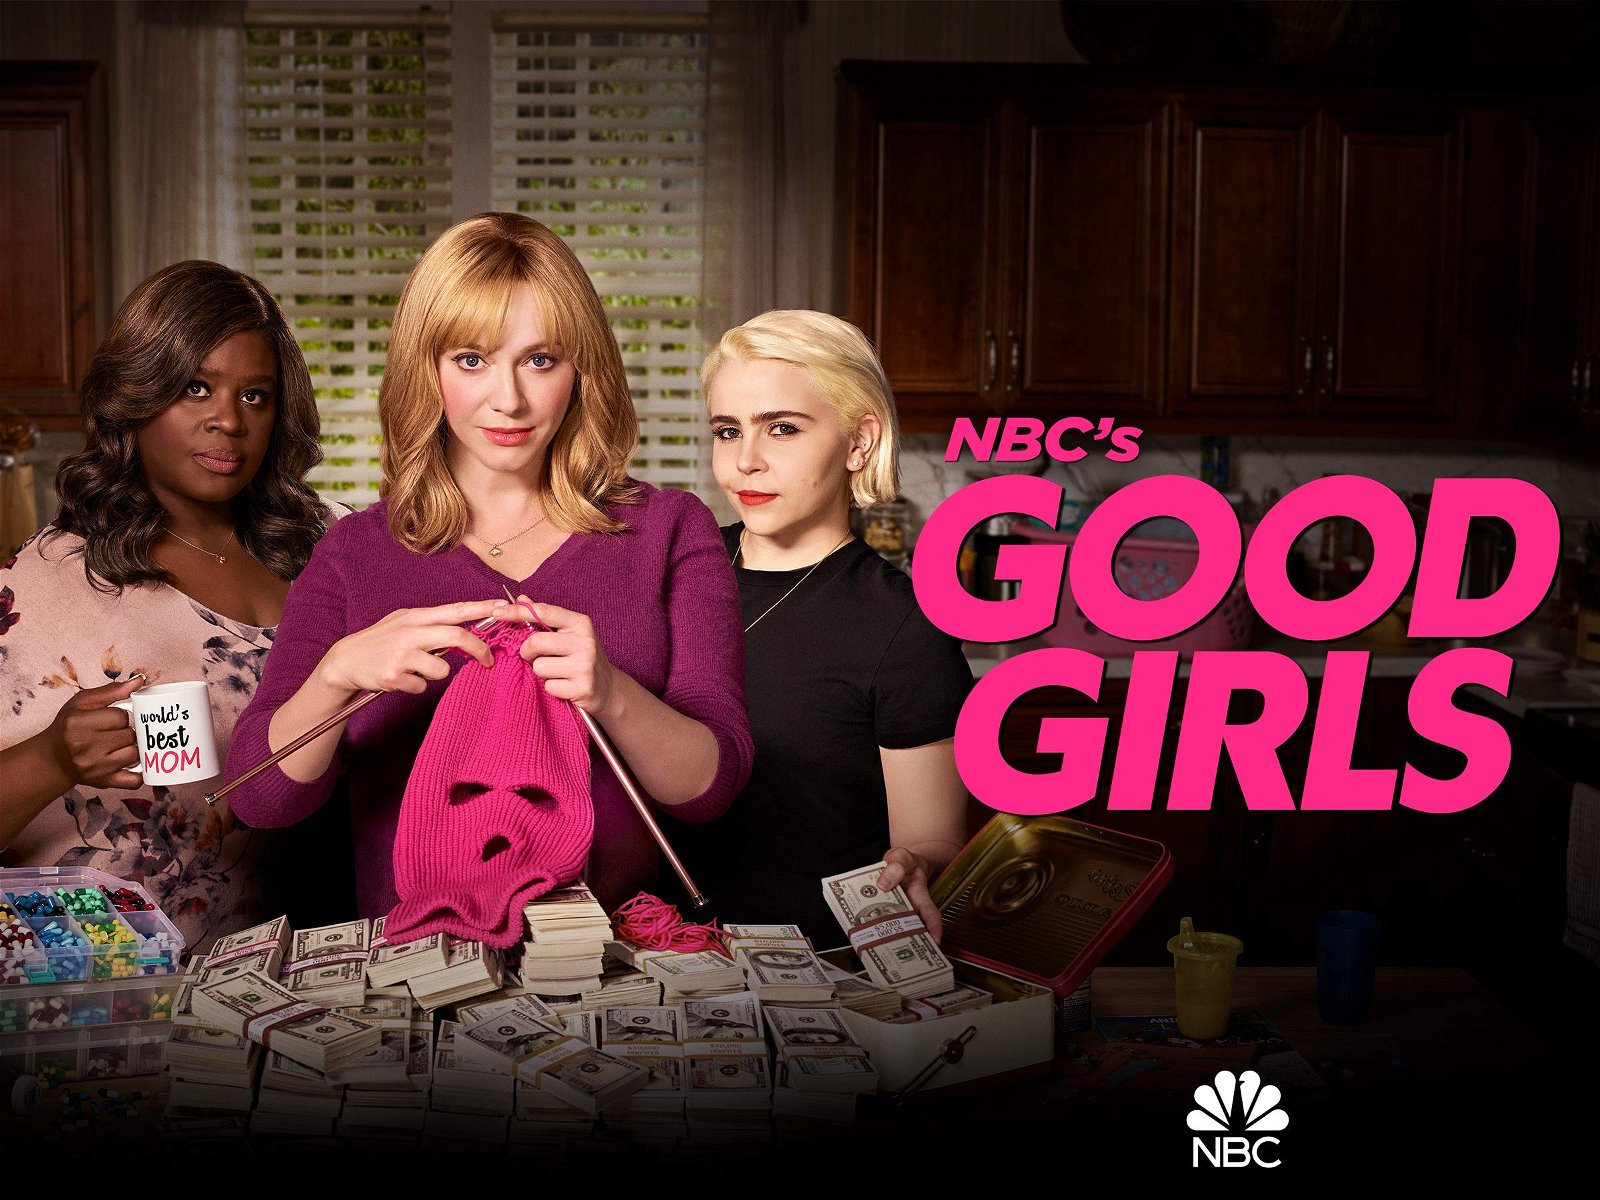 Will There Be a ‘Good Girls’ Season 5? Is the Show Renewed or Canceled?